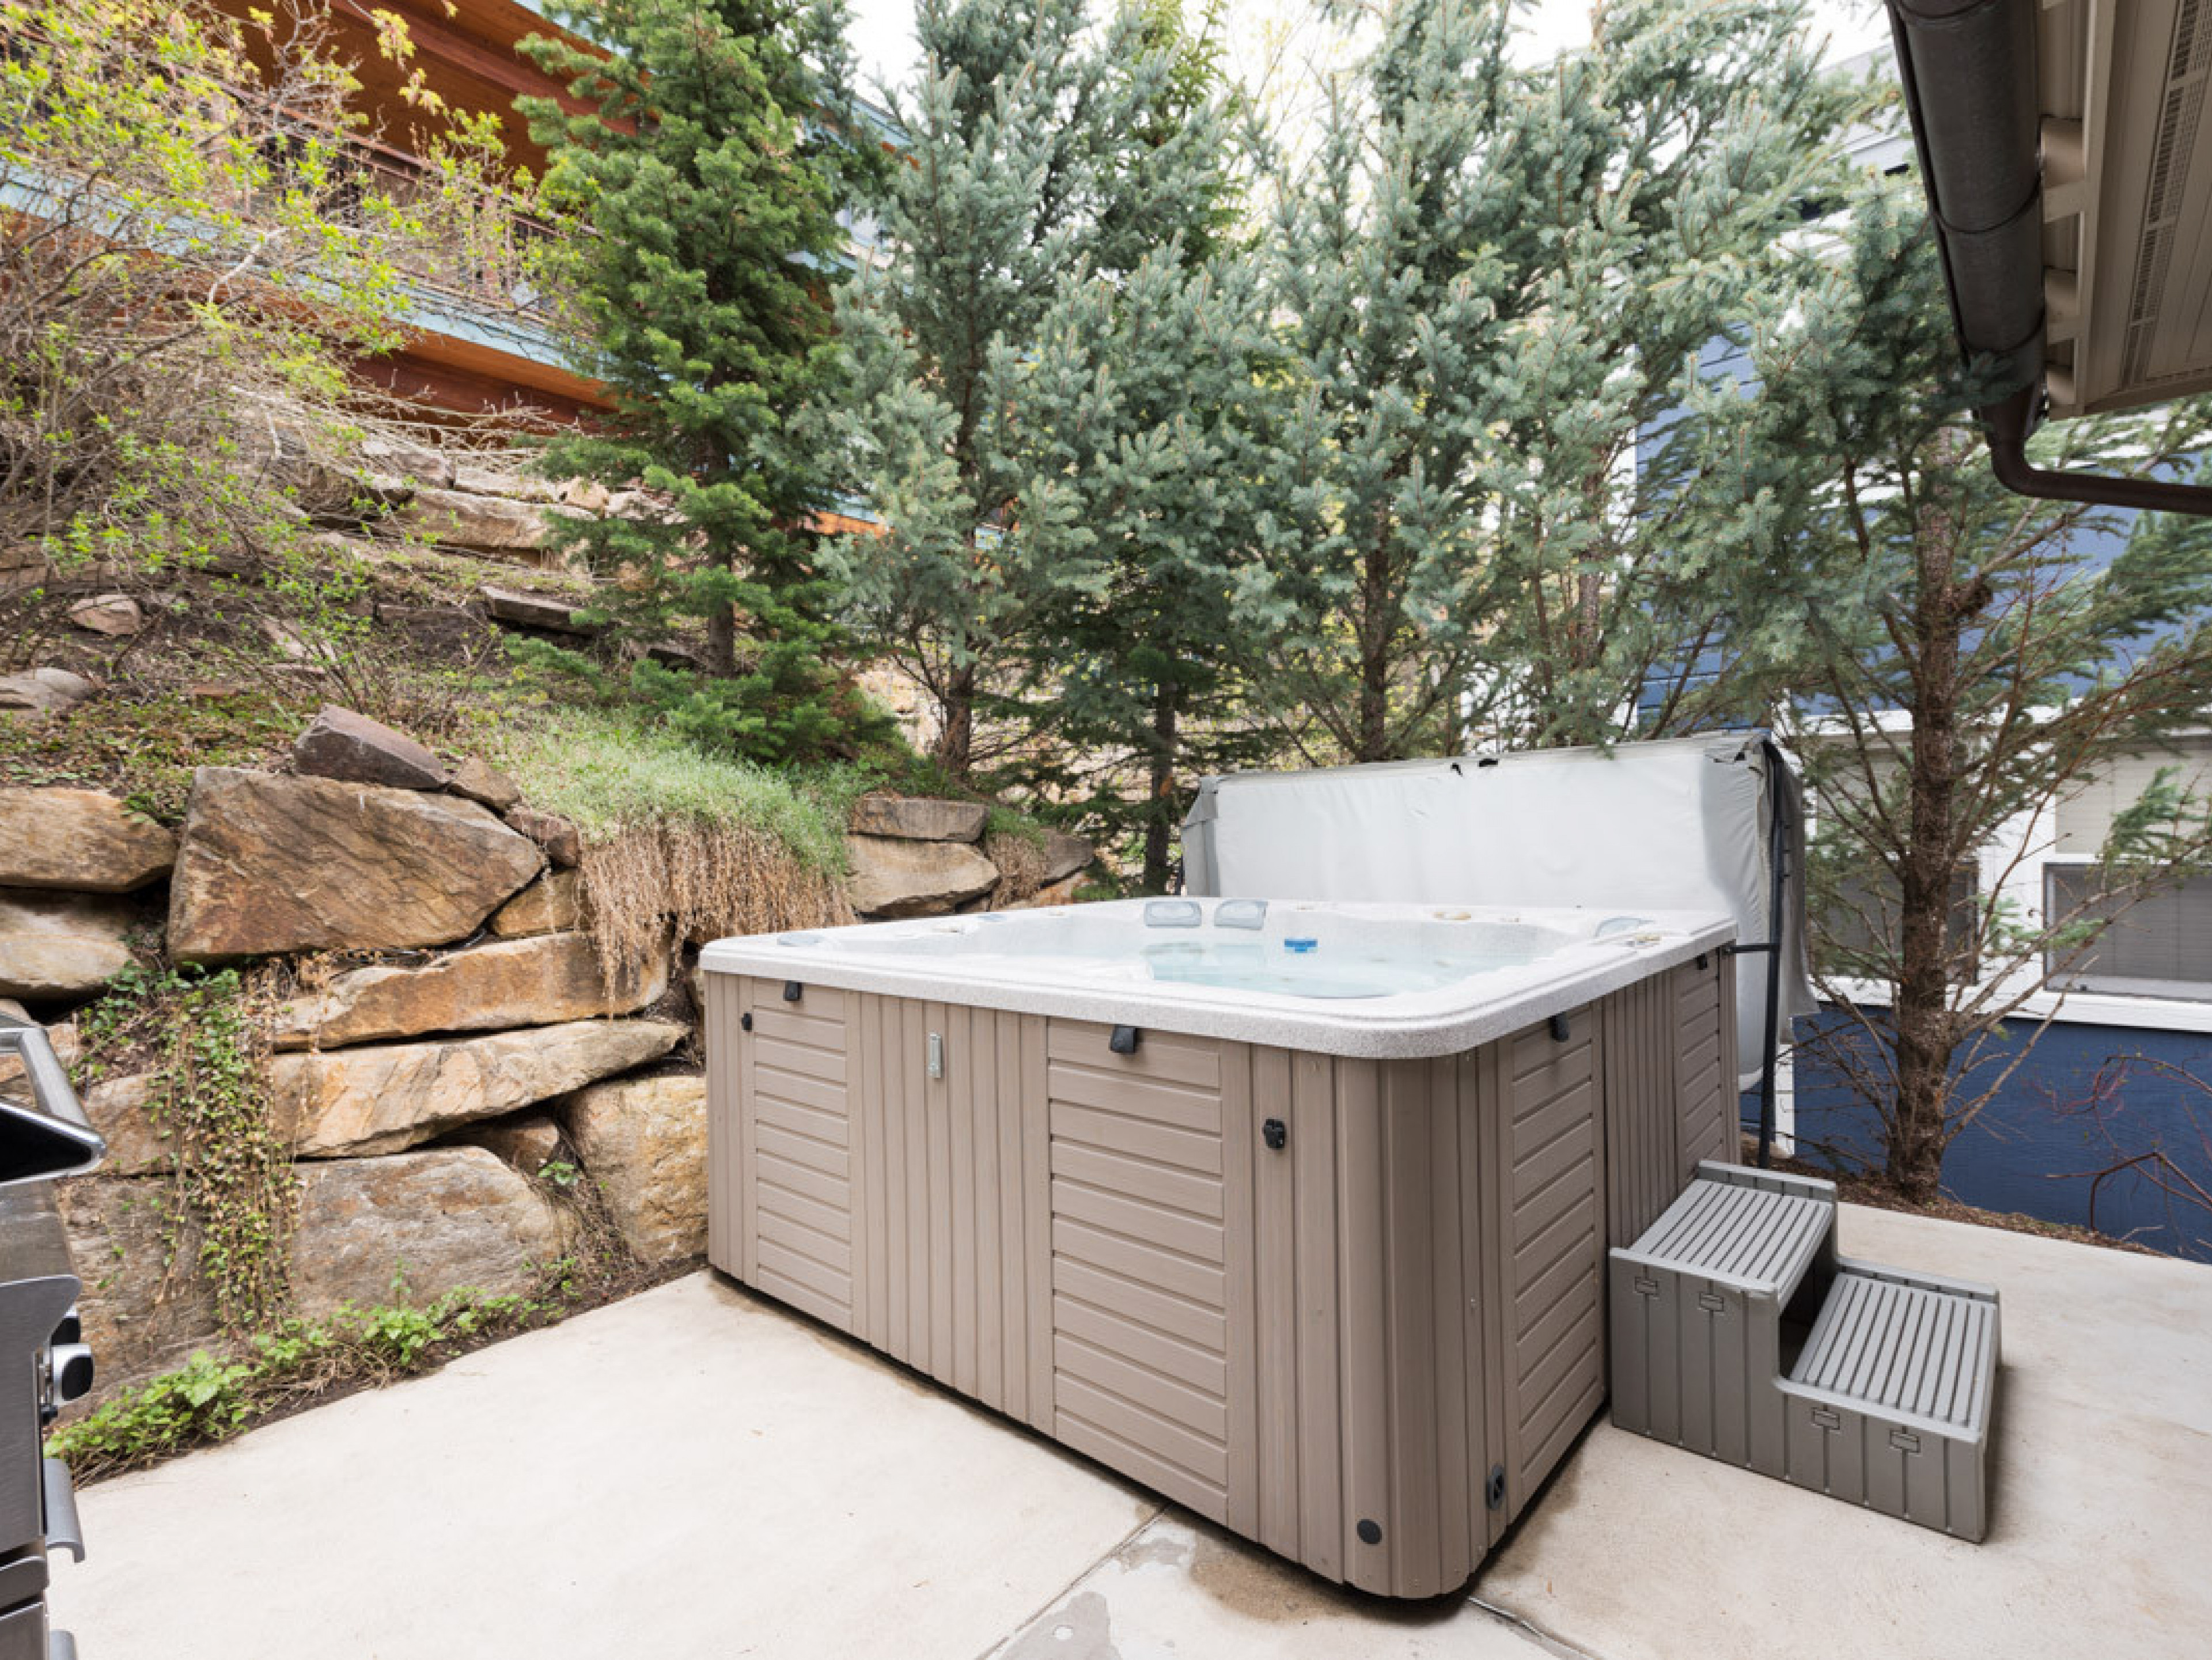 Park City 34 Park City vacation rentals with hot tubs